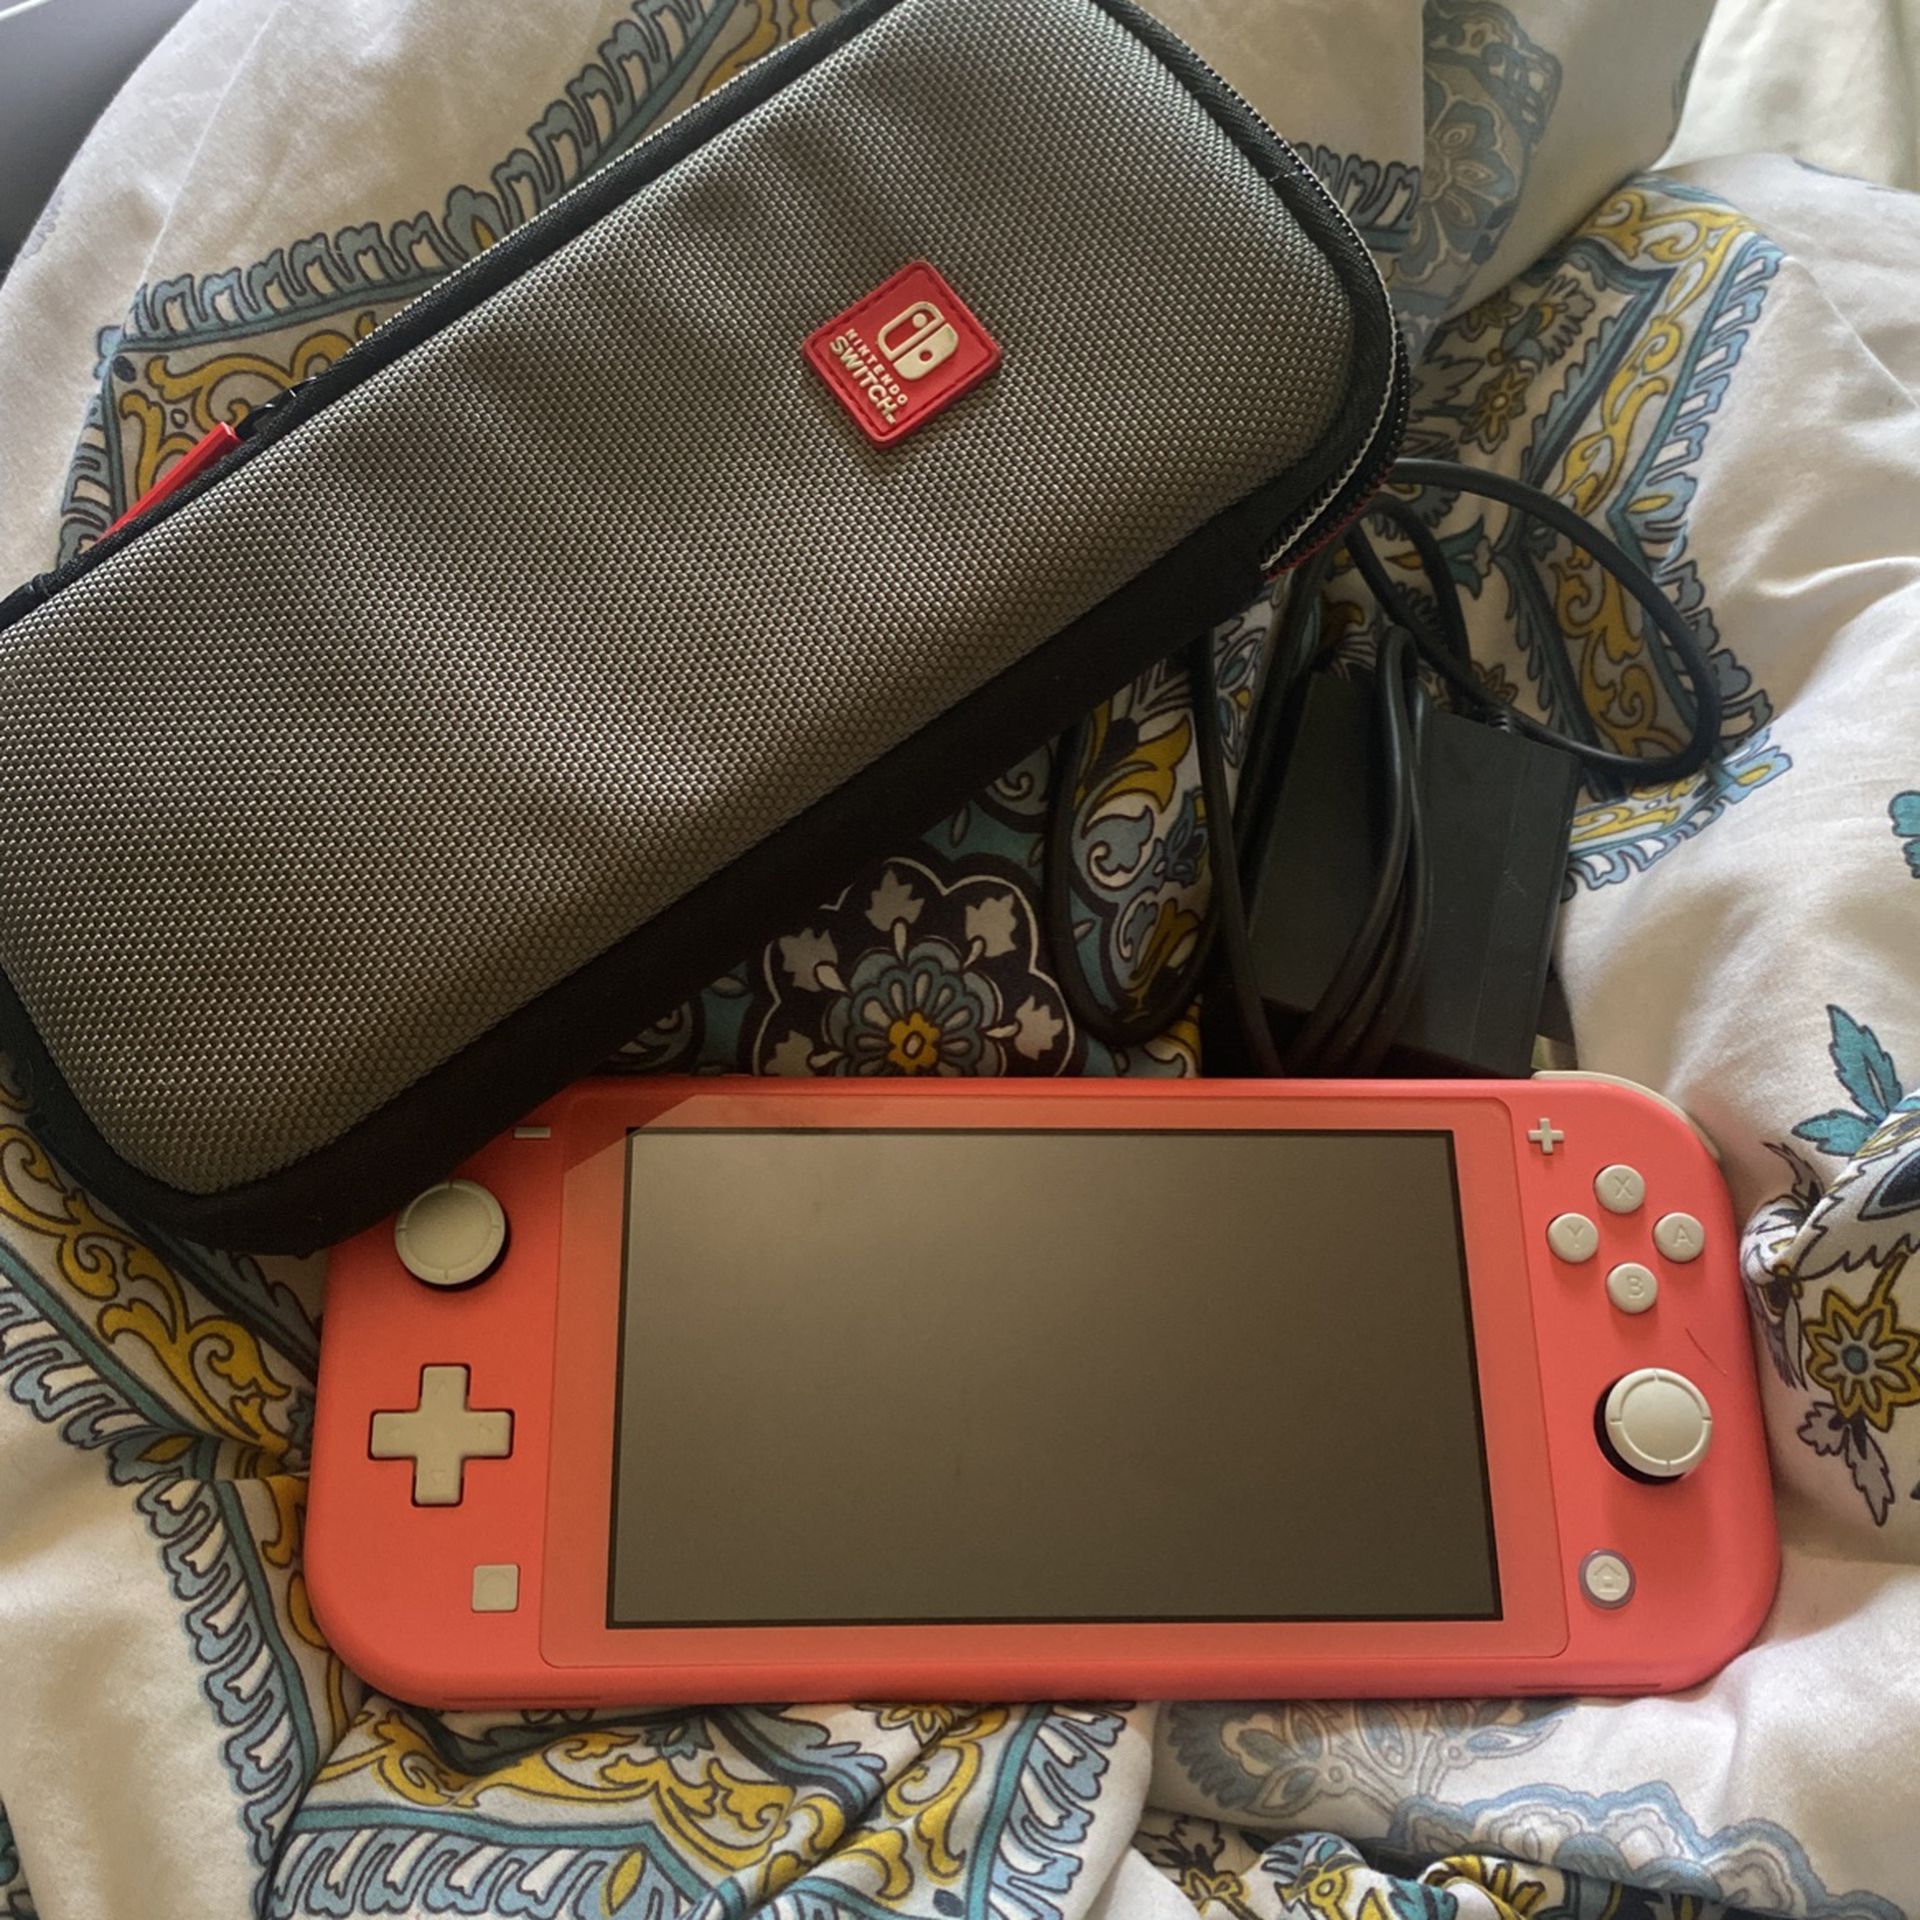 Nintendo Switch Lite. (Case and charger included)